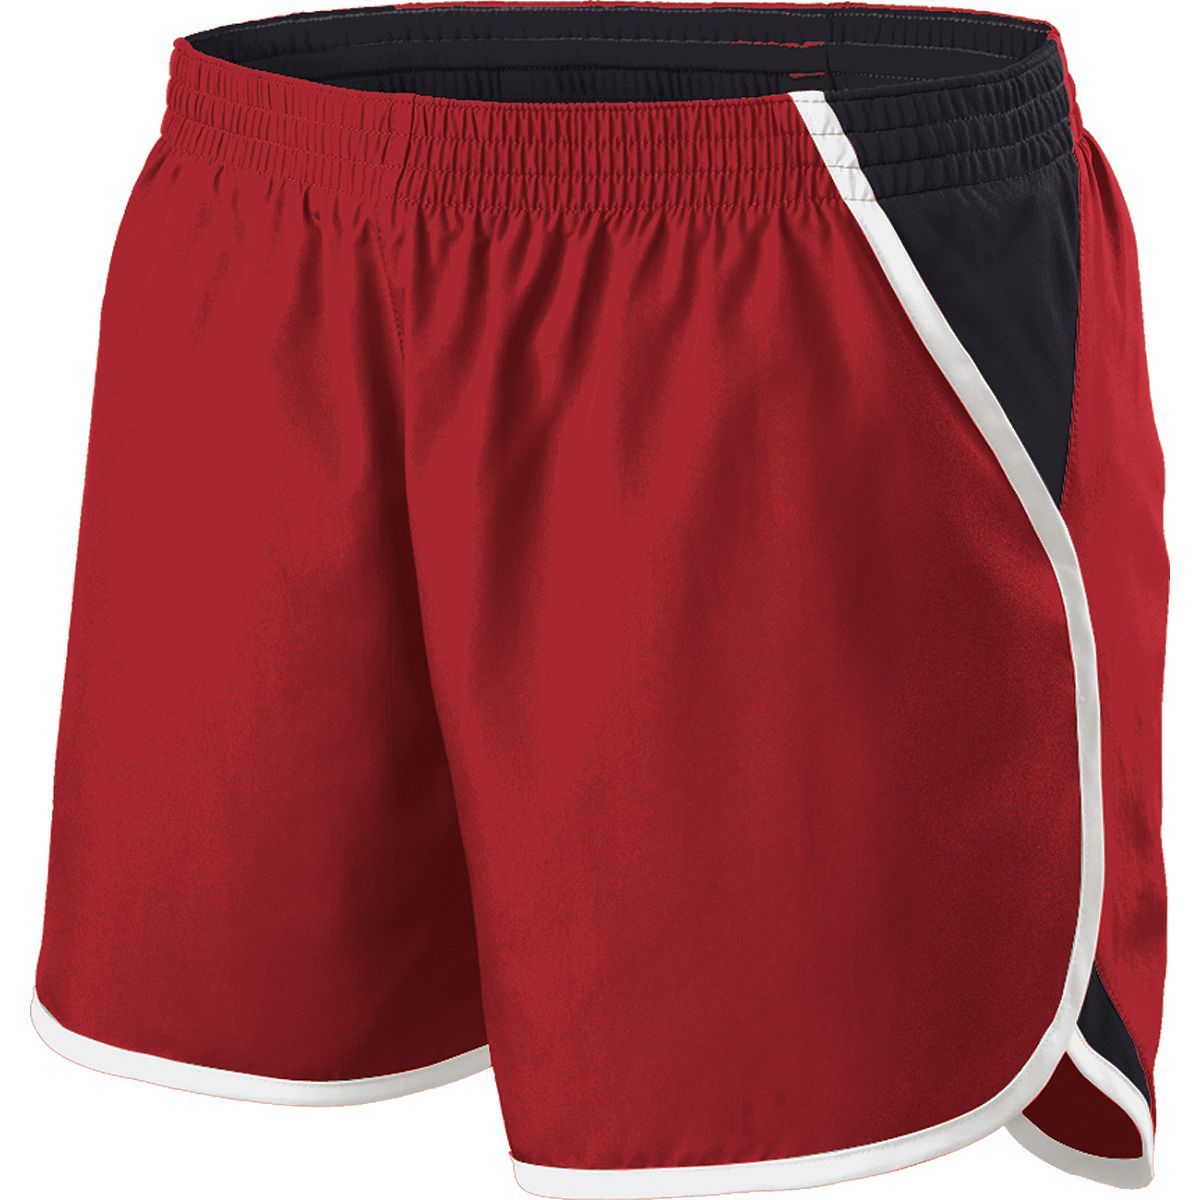 Holloway Energize Shorts in Scarlet/Black/White  -Part of the Ladies, Ladies-Shorts, Holloway product lines at KanaleyCreations.com